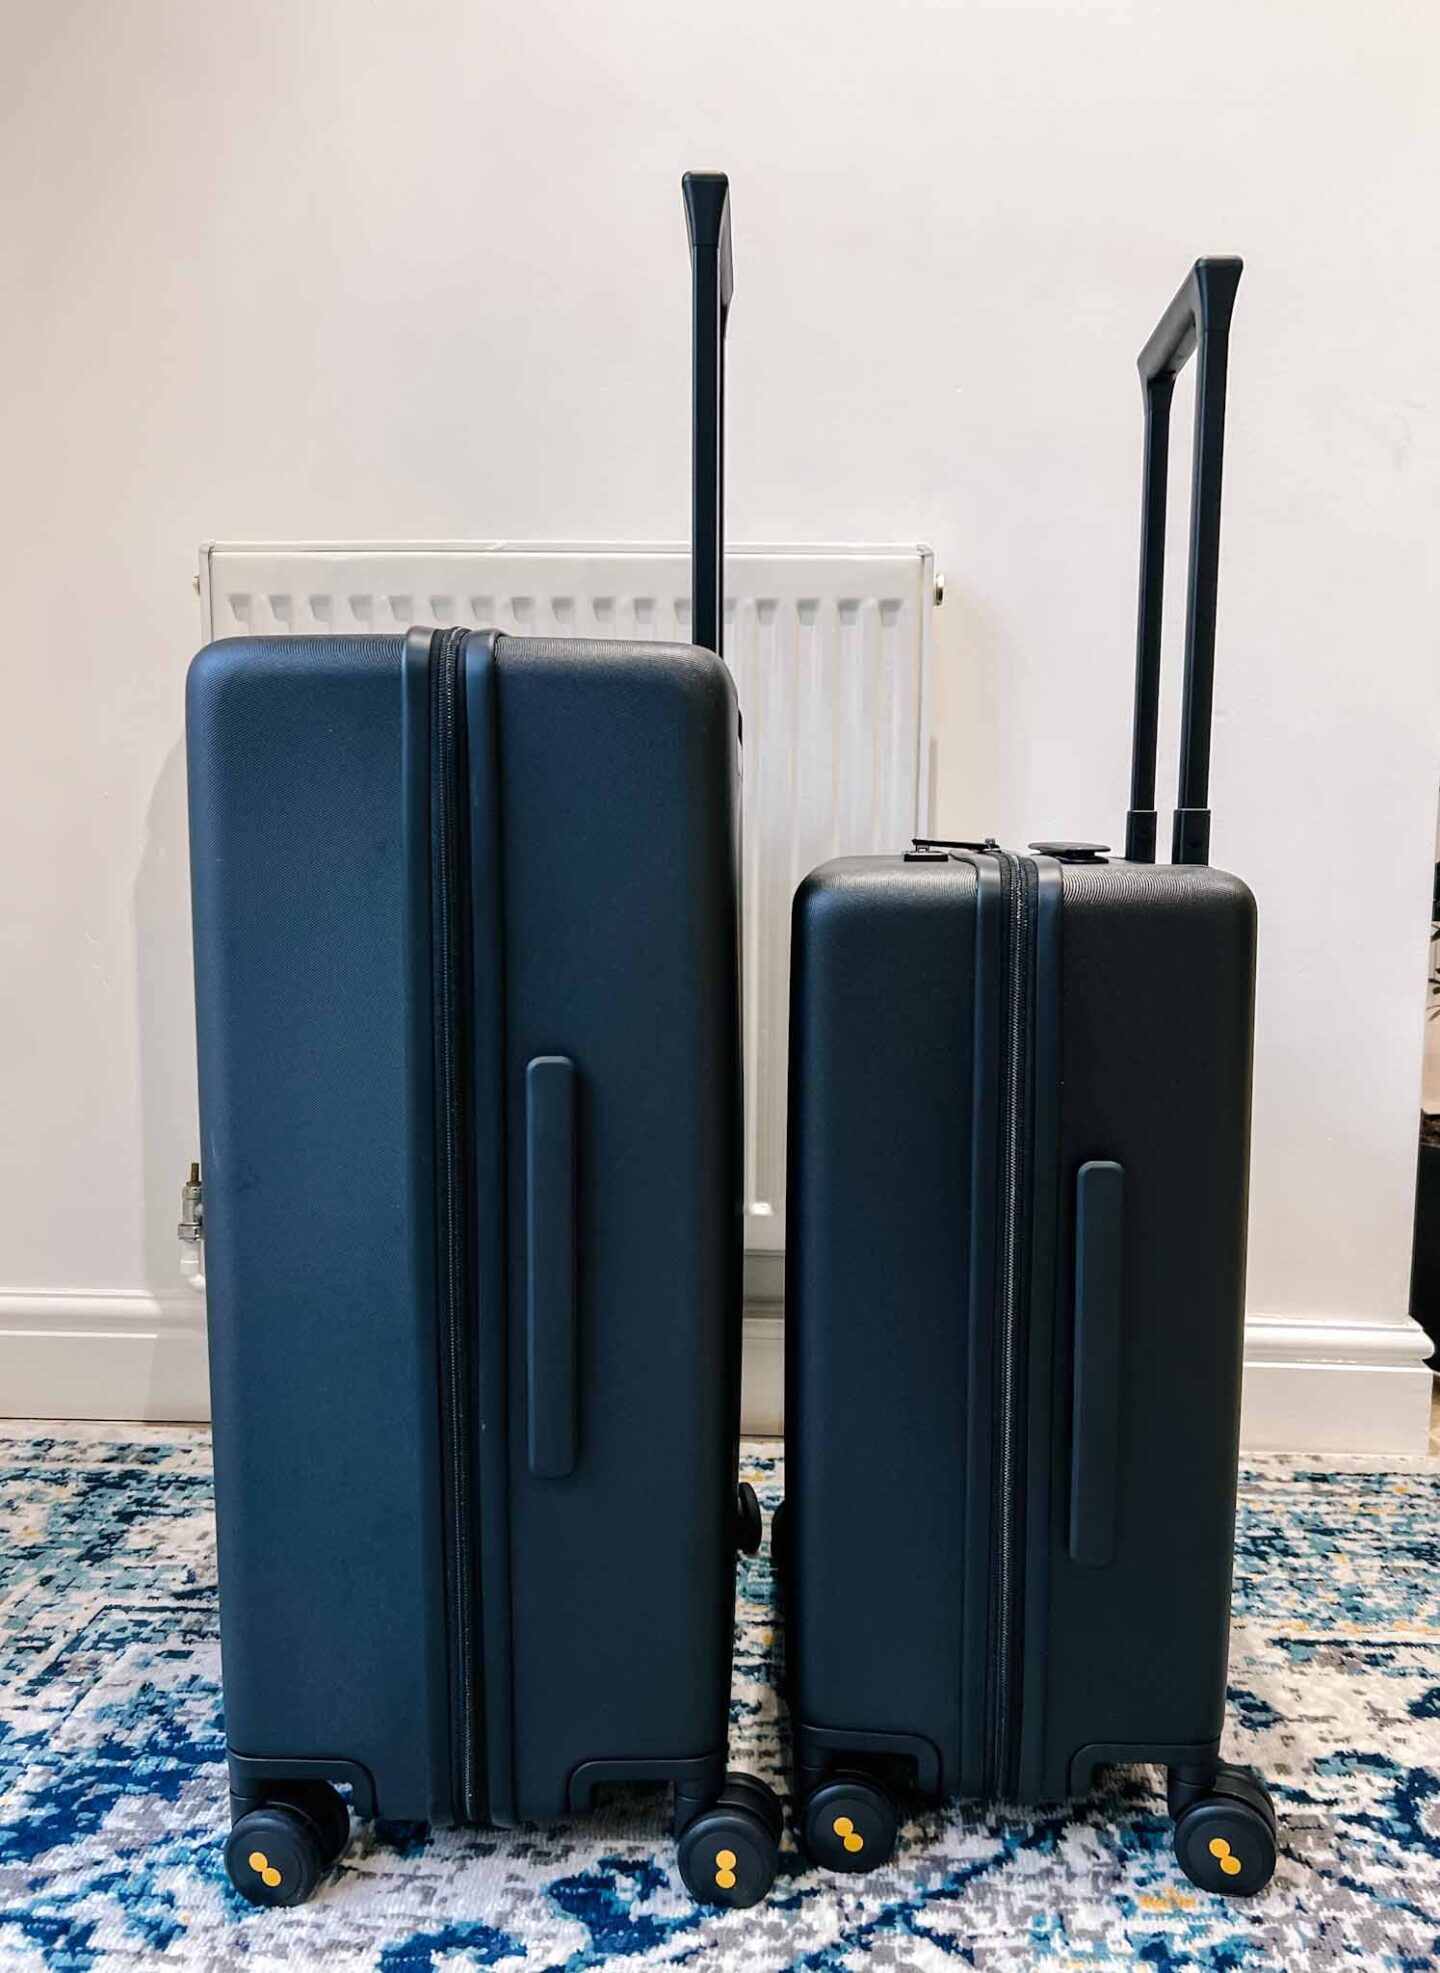 LEVEL8 luggage review, textured set from the side showing depth